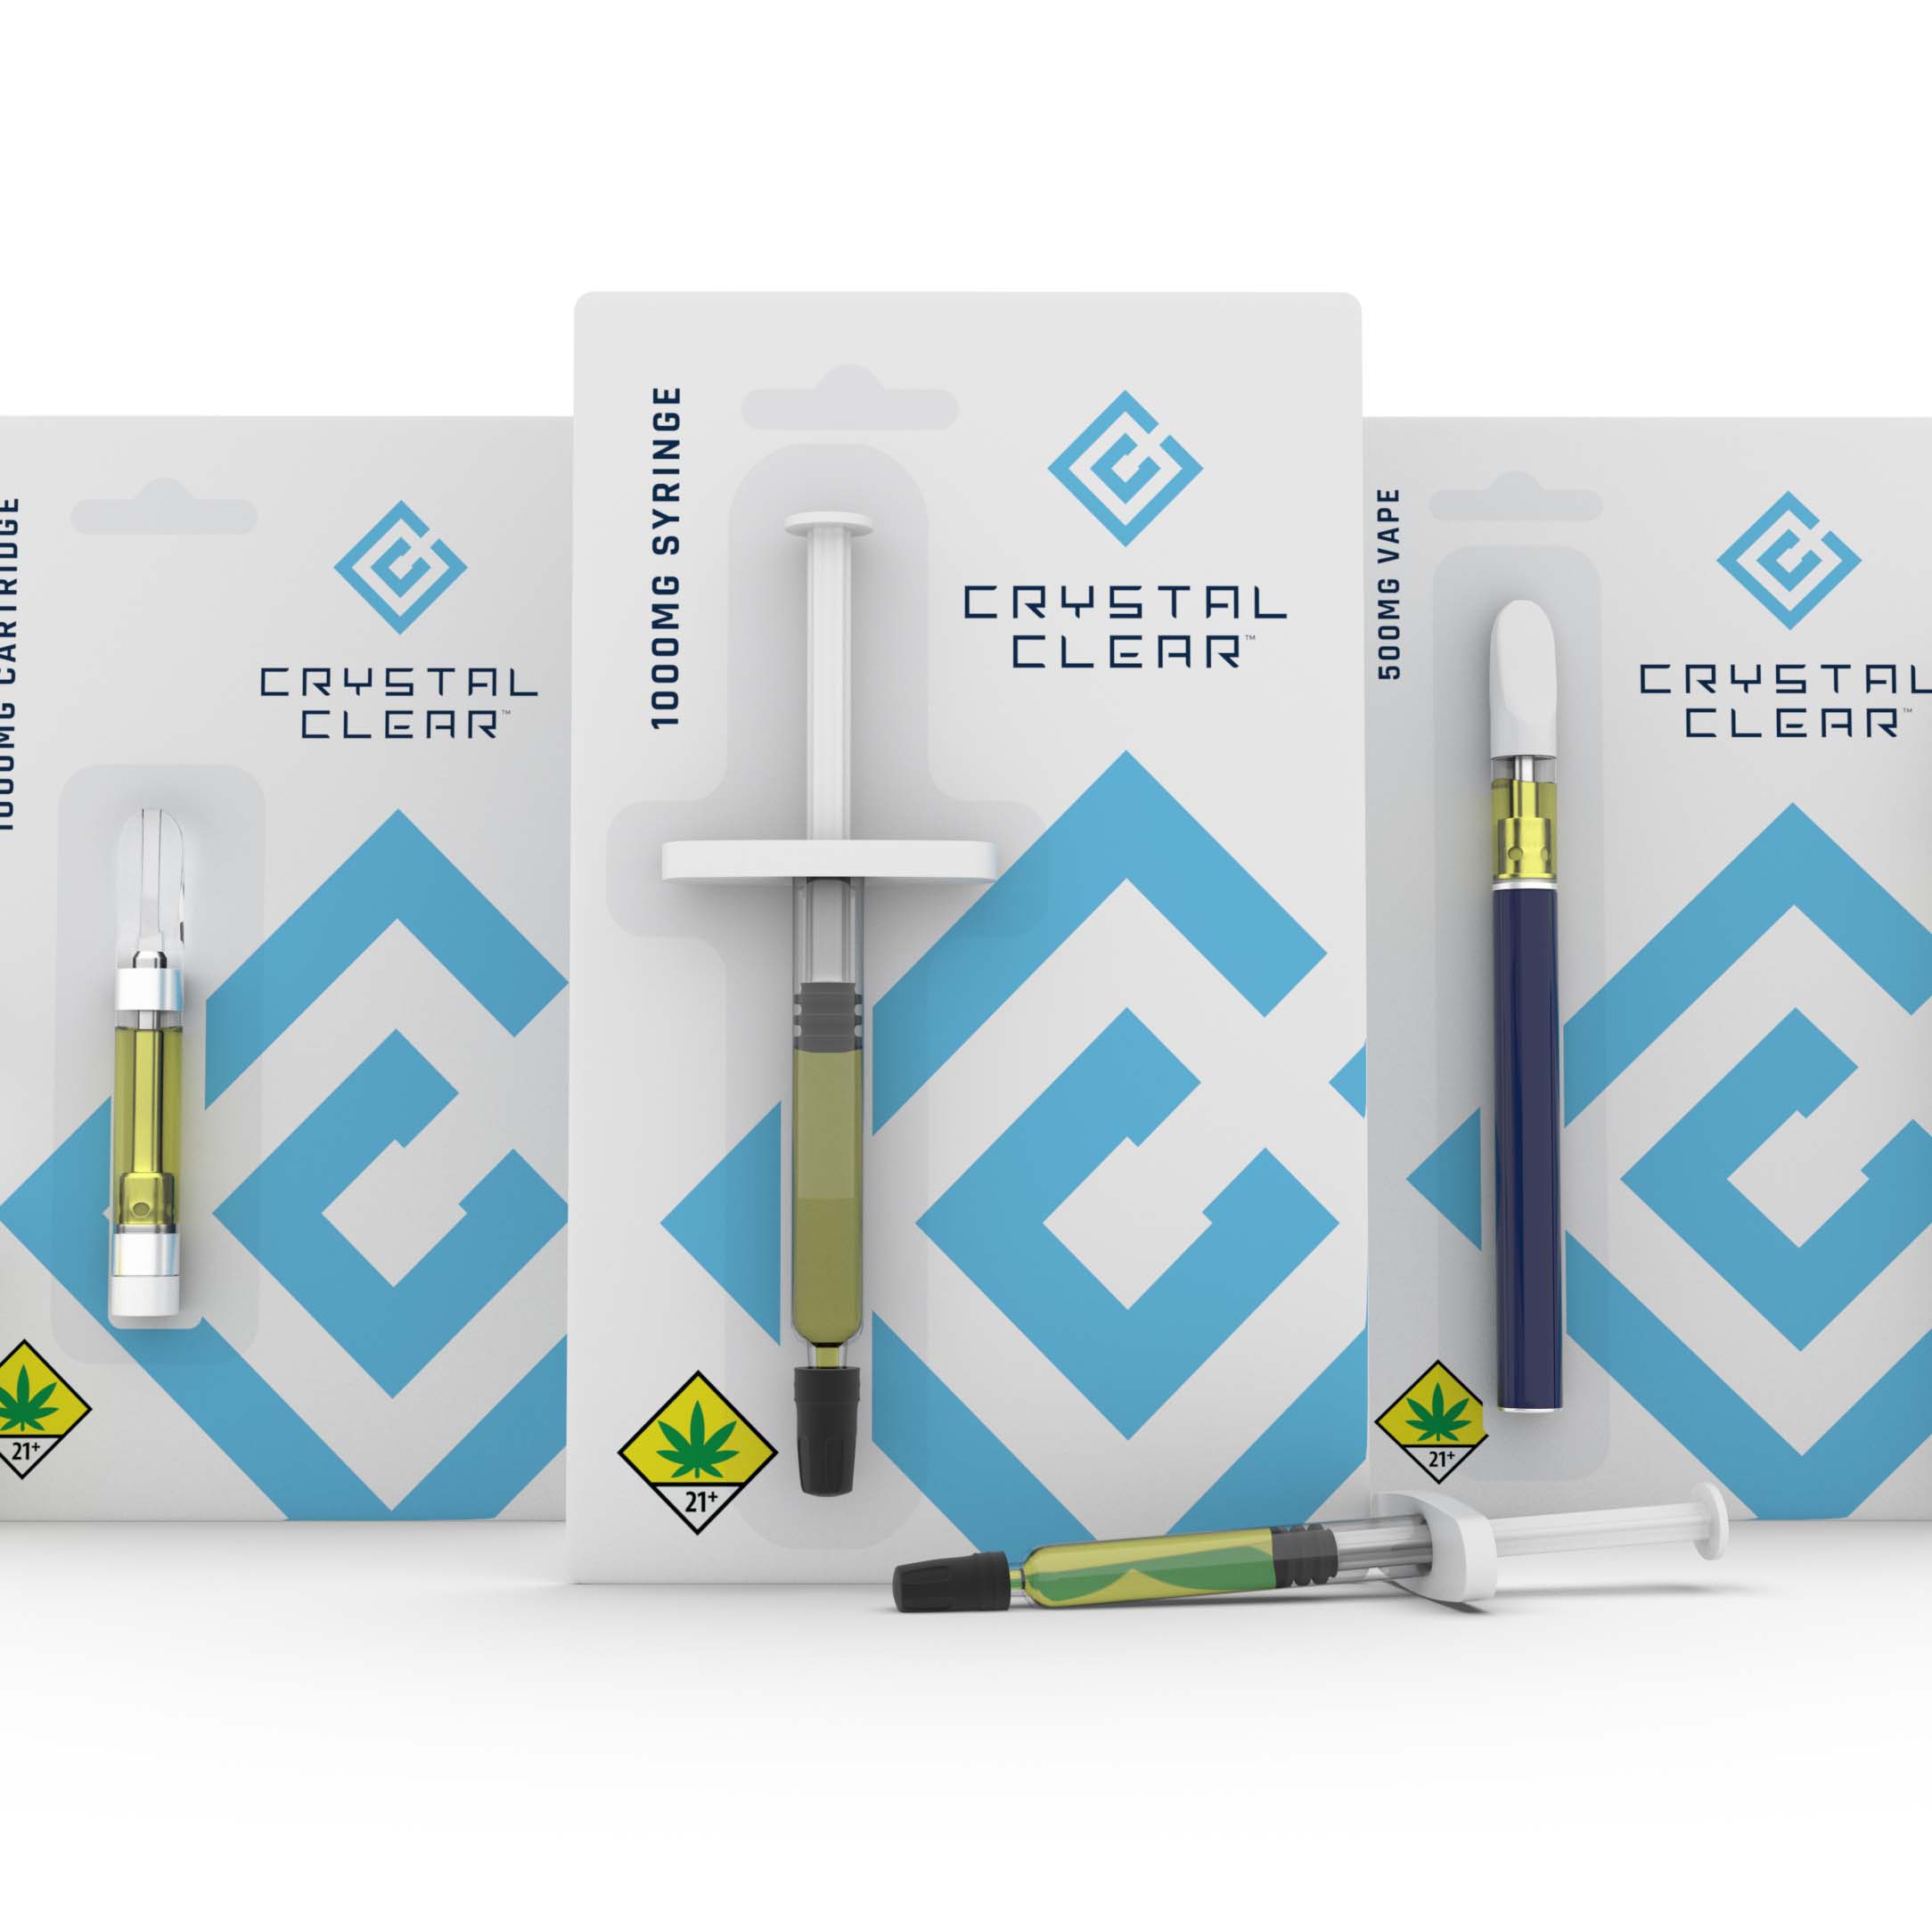 Crystal Clear Cartridge, Syringe, and Disposable from Northwest Cannabis Solutions